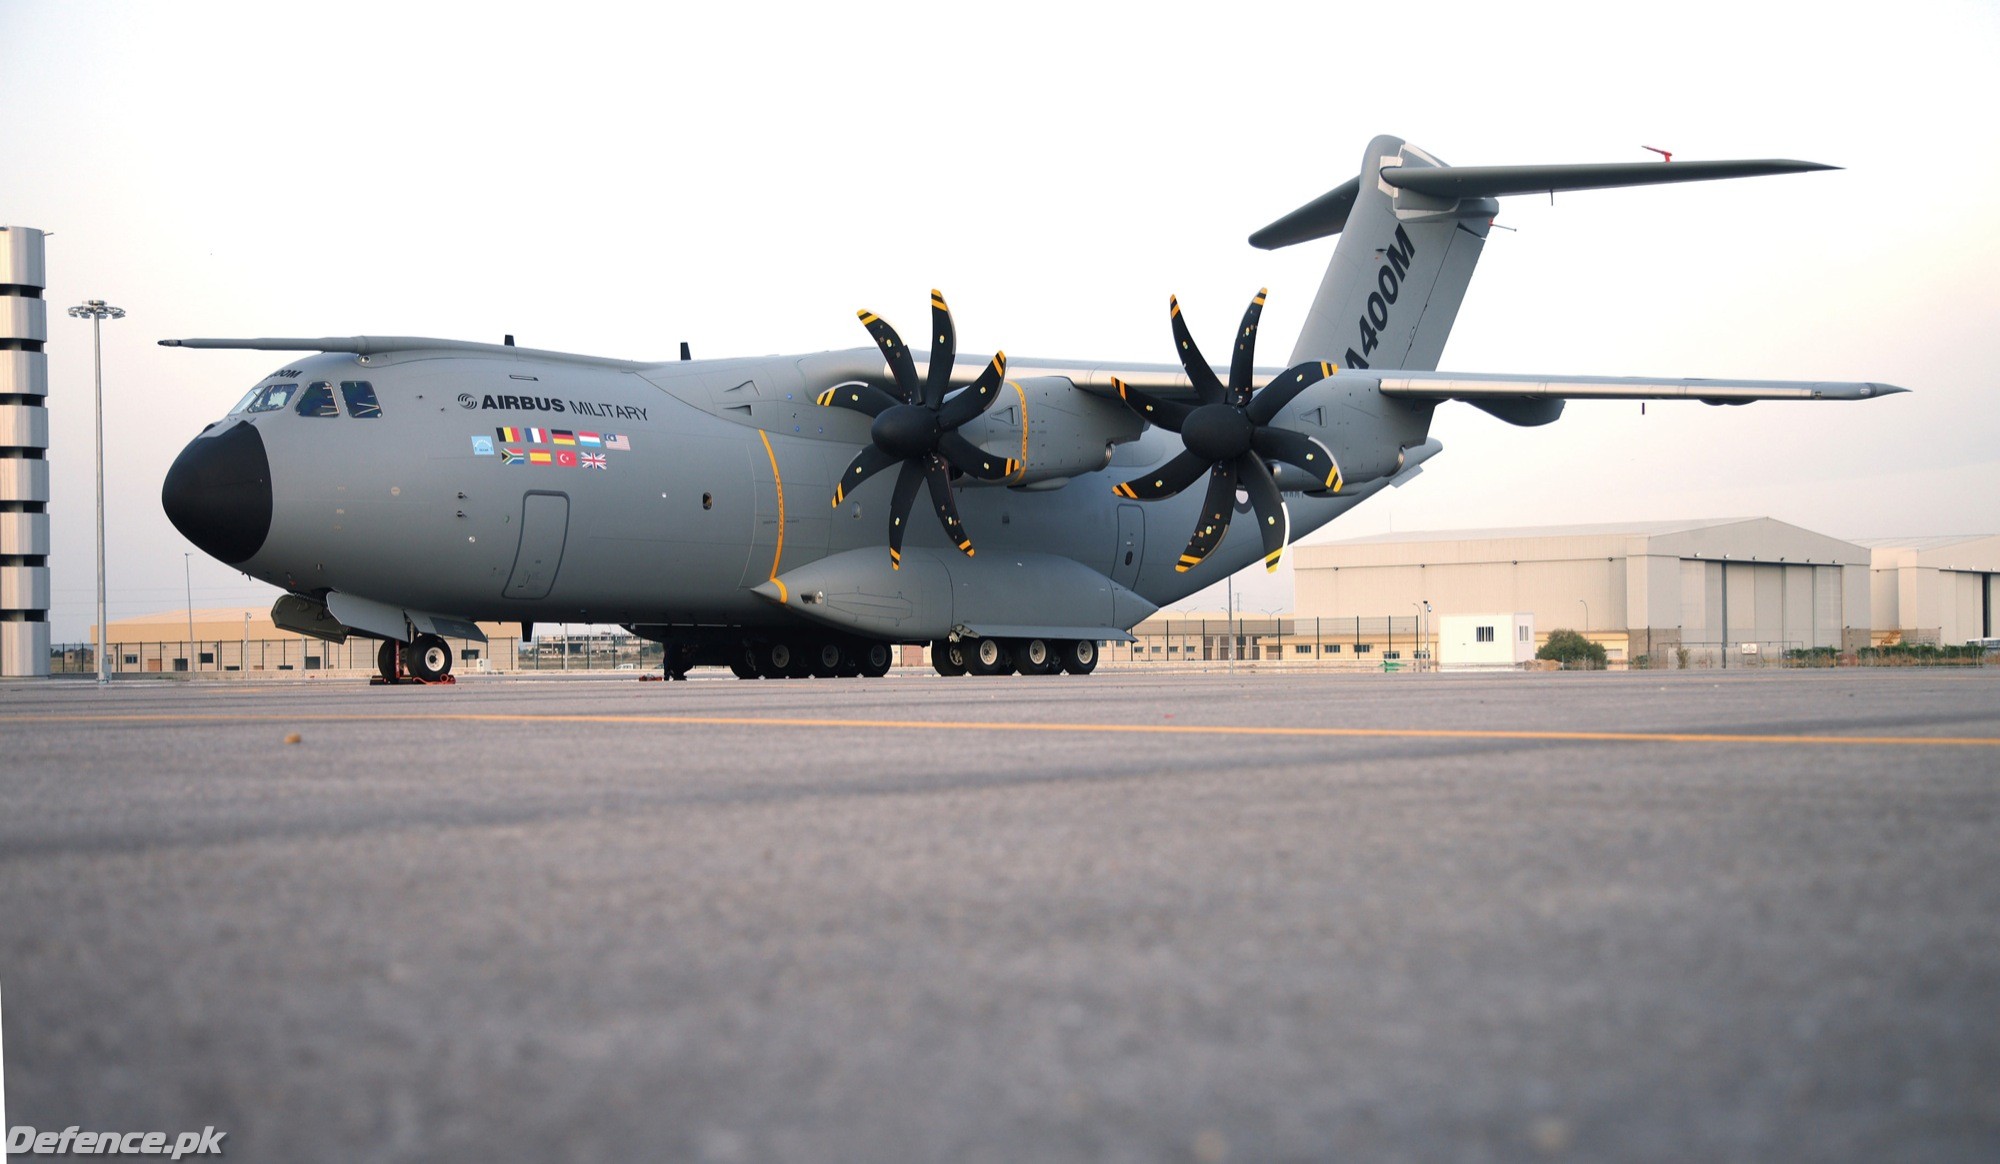 A400M rolled out